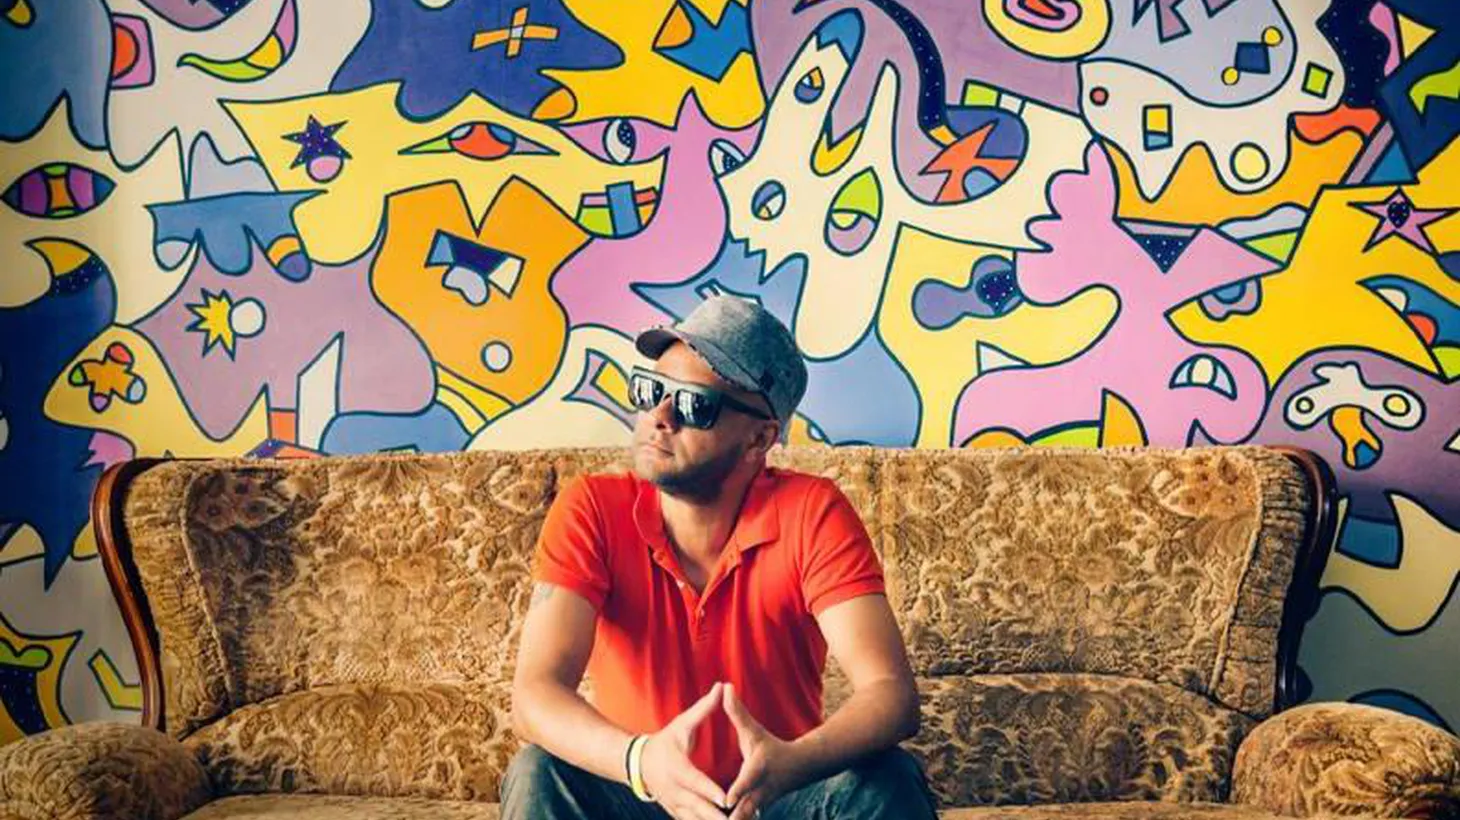 From early rave classics in the UK to the infections rhythms of his new album, Nightmares on Wax, aka George Evelyn, has had enduring success as a major force in modern electronica.